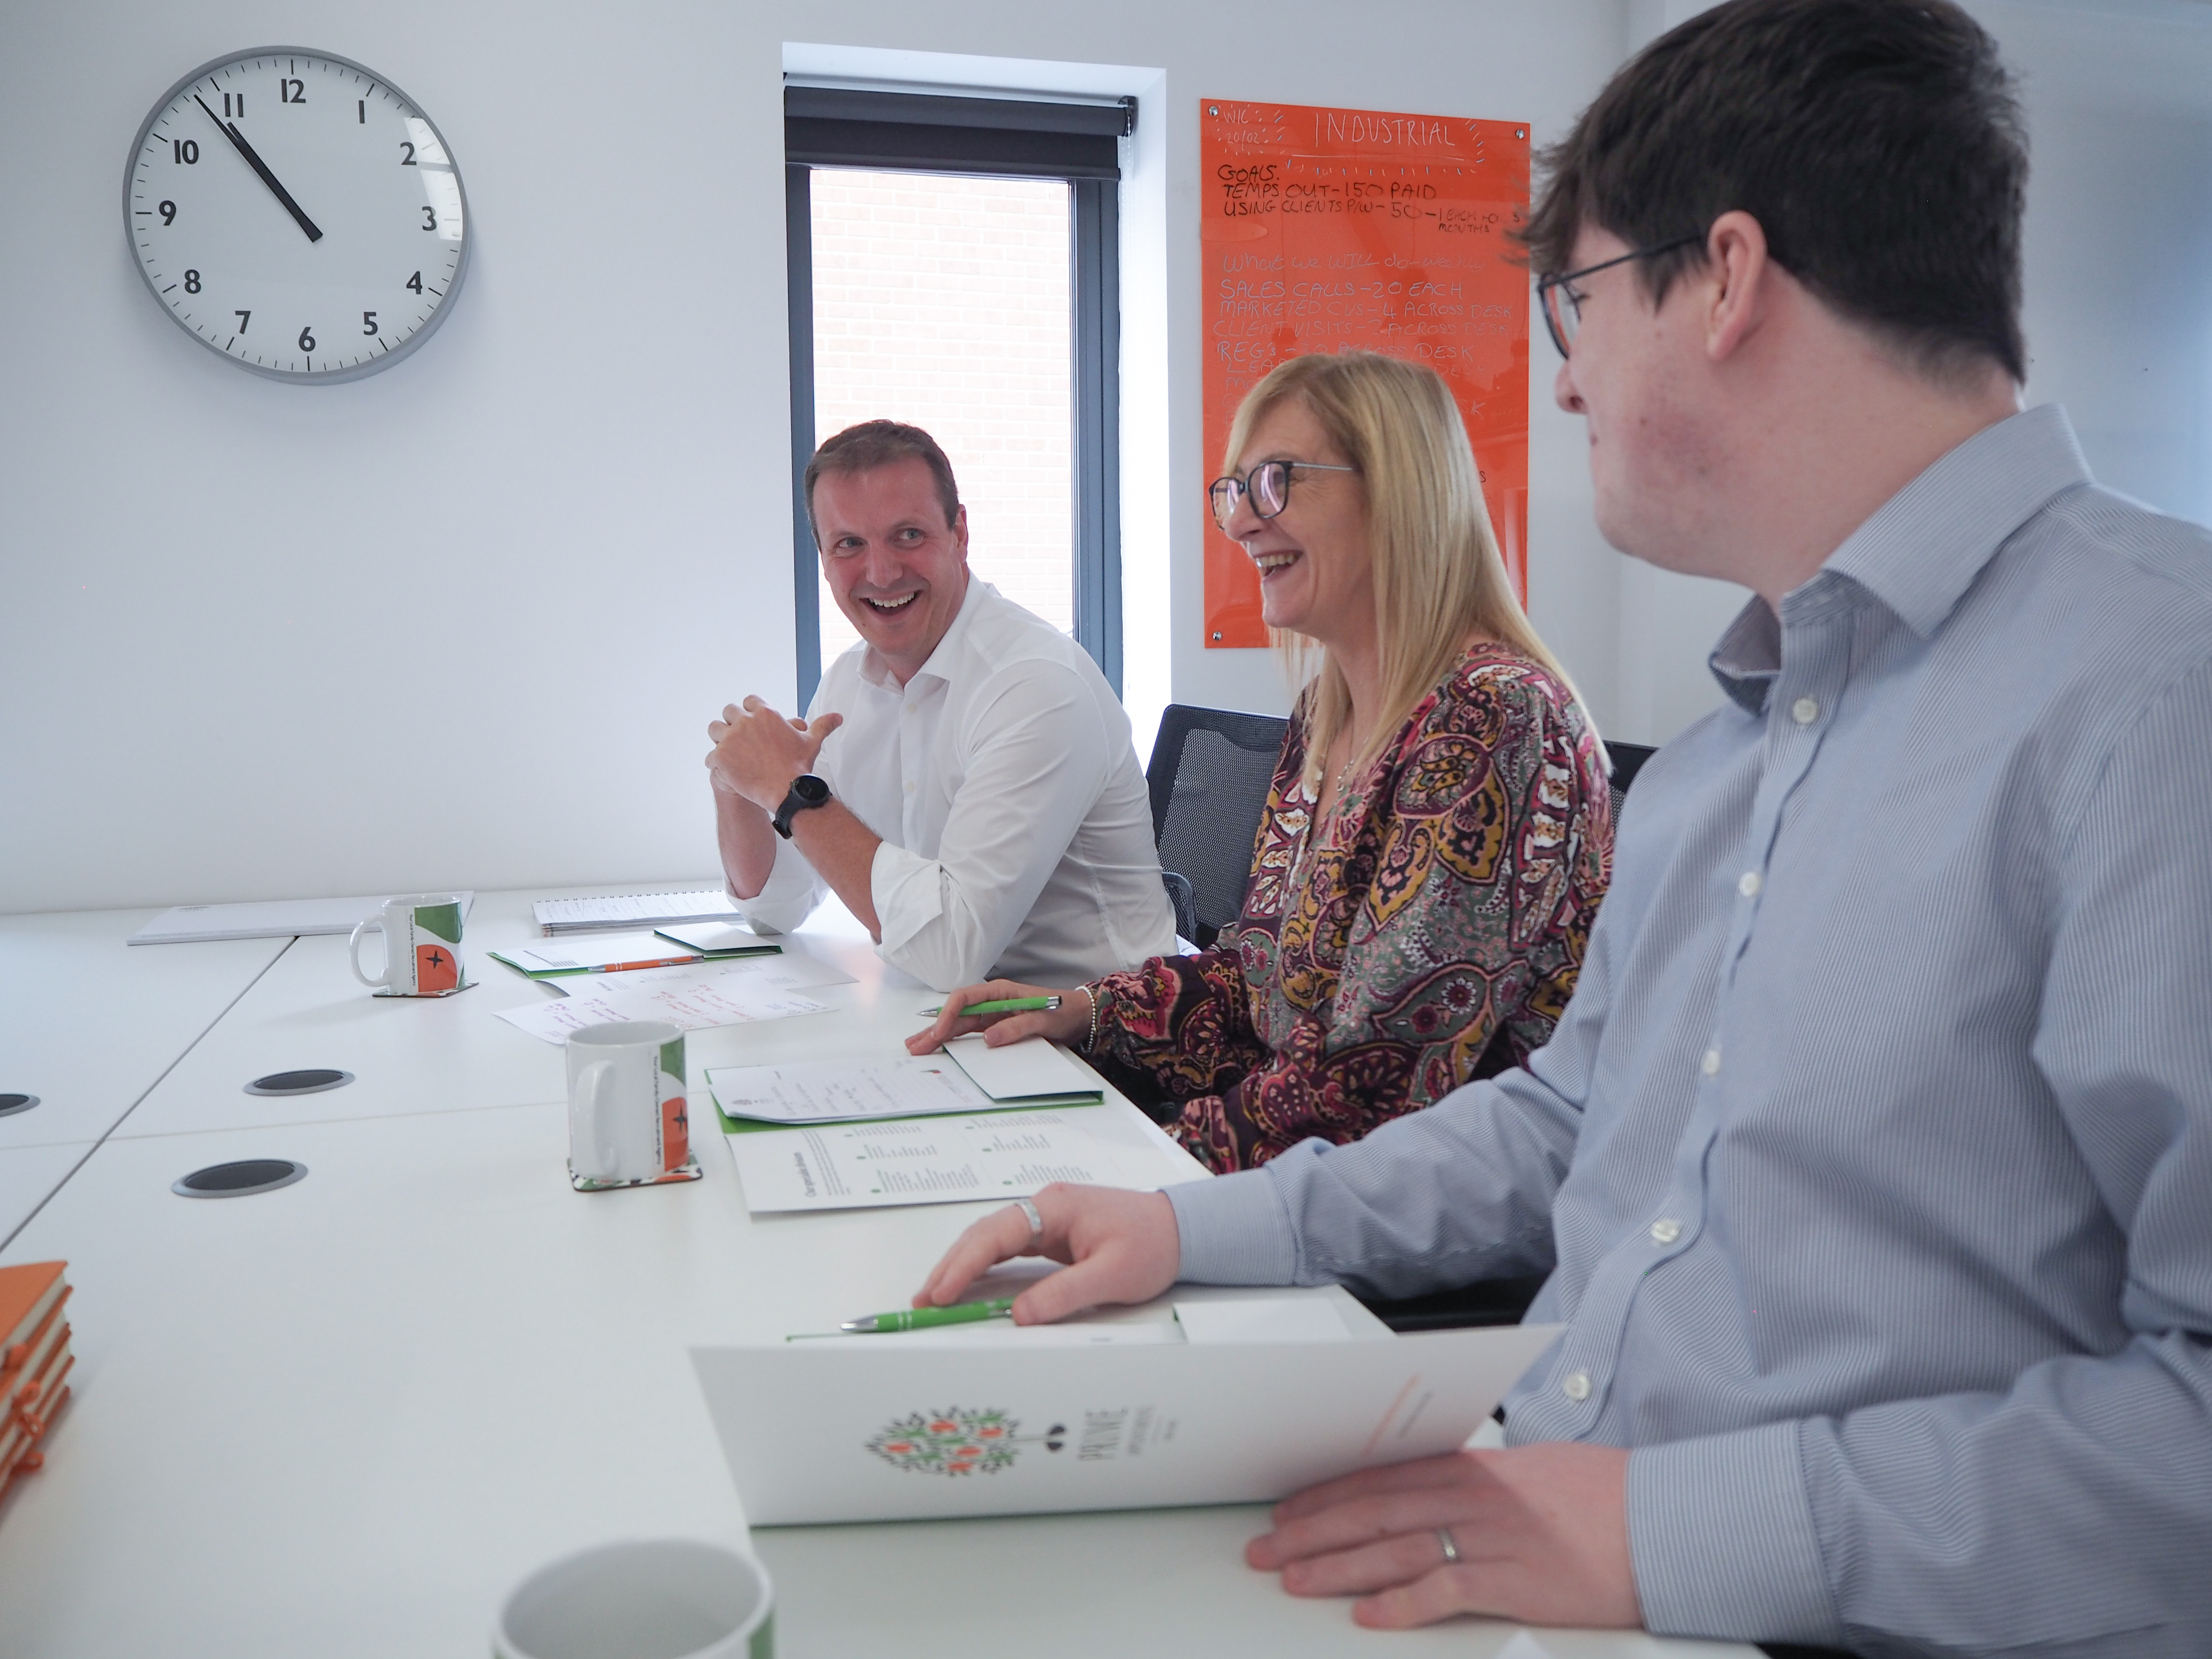 Tom Beale, Consultant, Karen Yaxley, Accounts & Ross Brown, Senior Consultant having open discussion